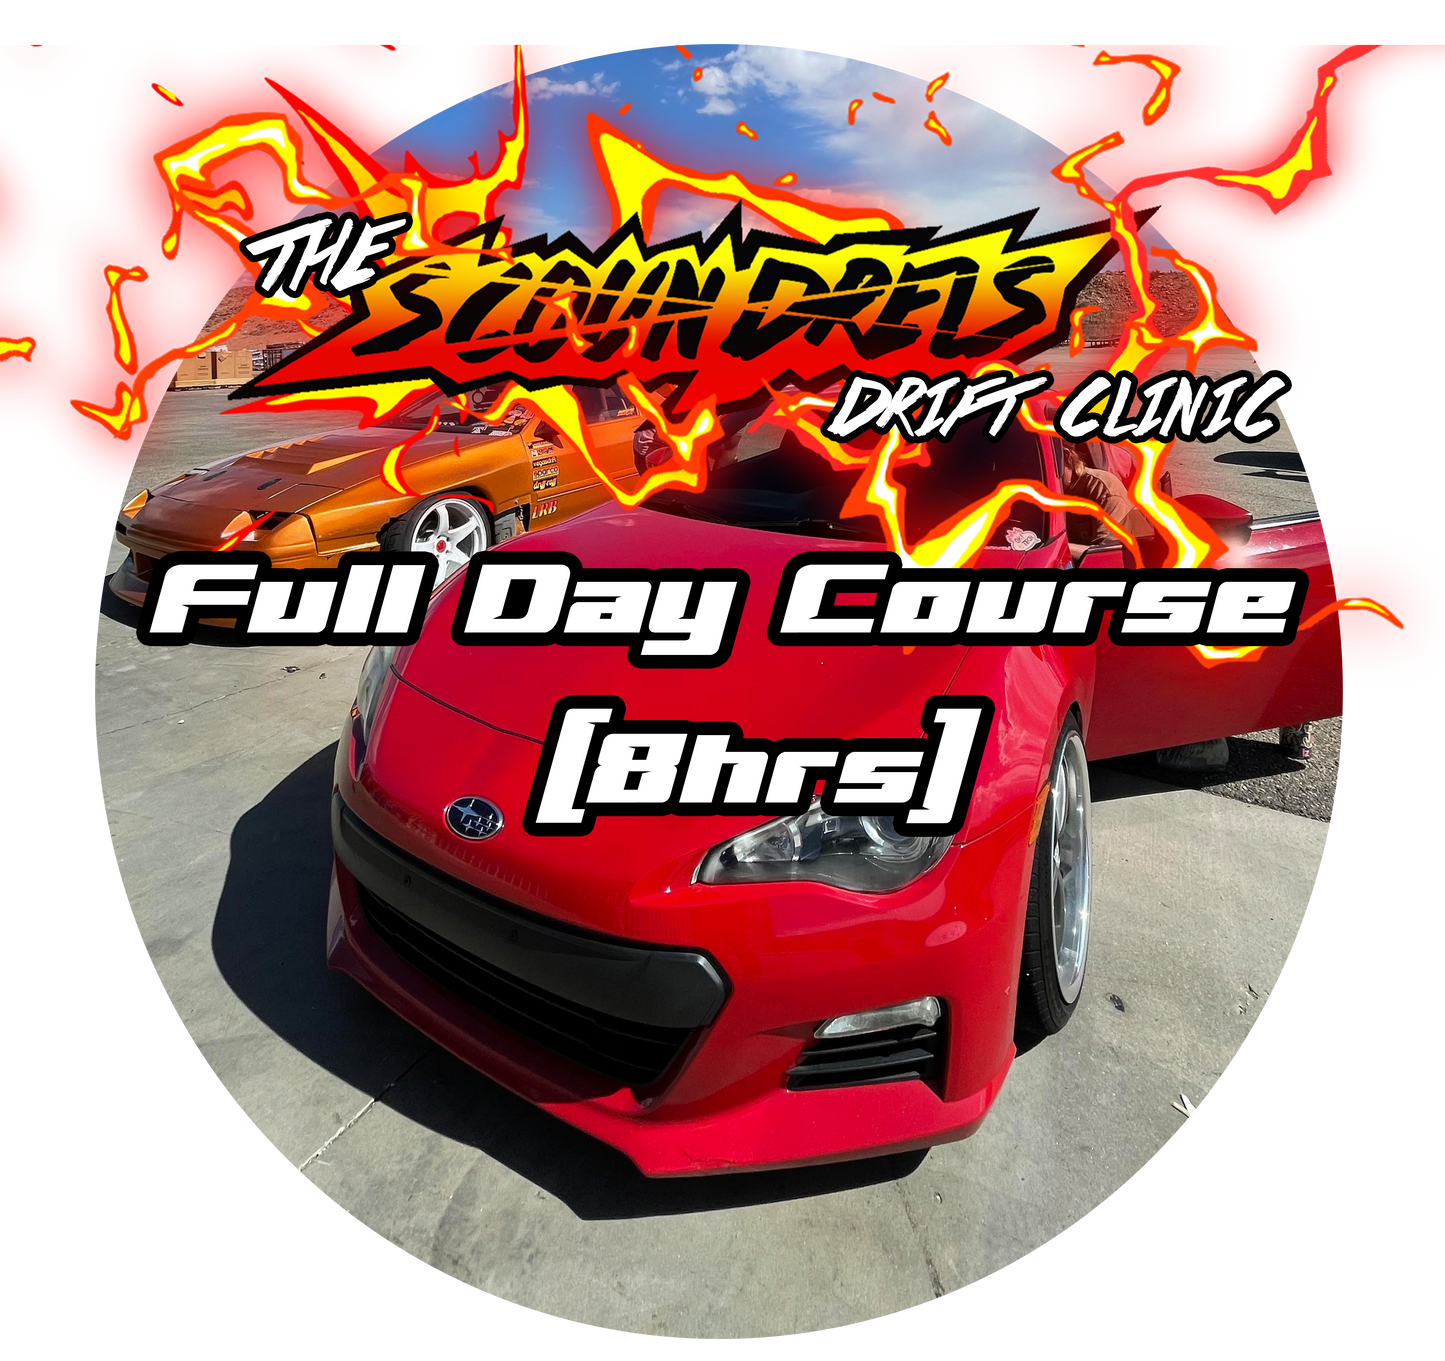 FULL-DAY COURSE